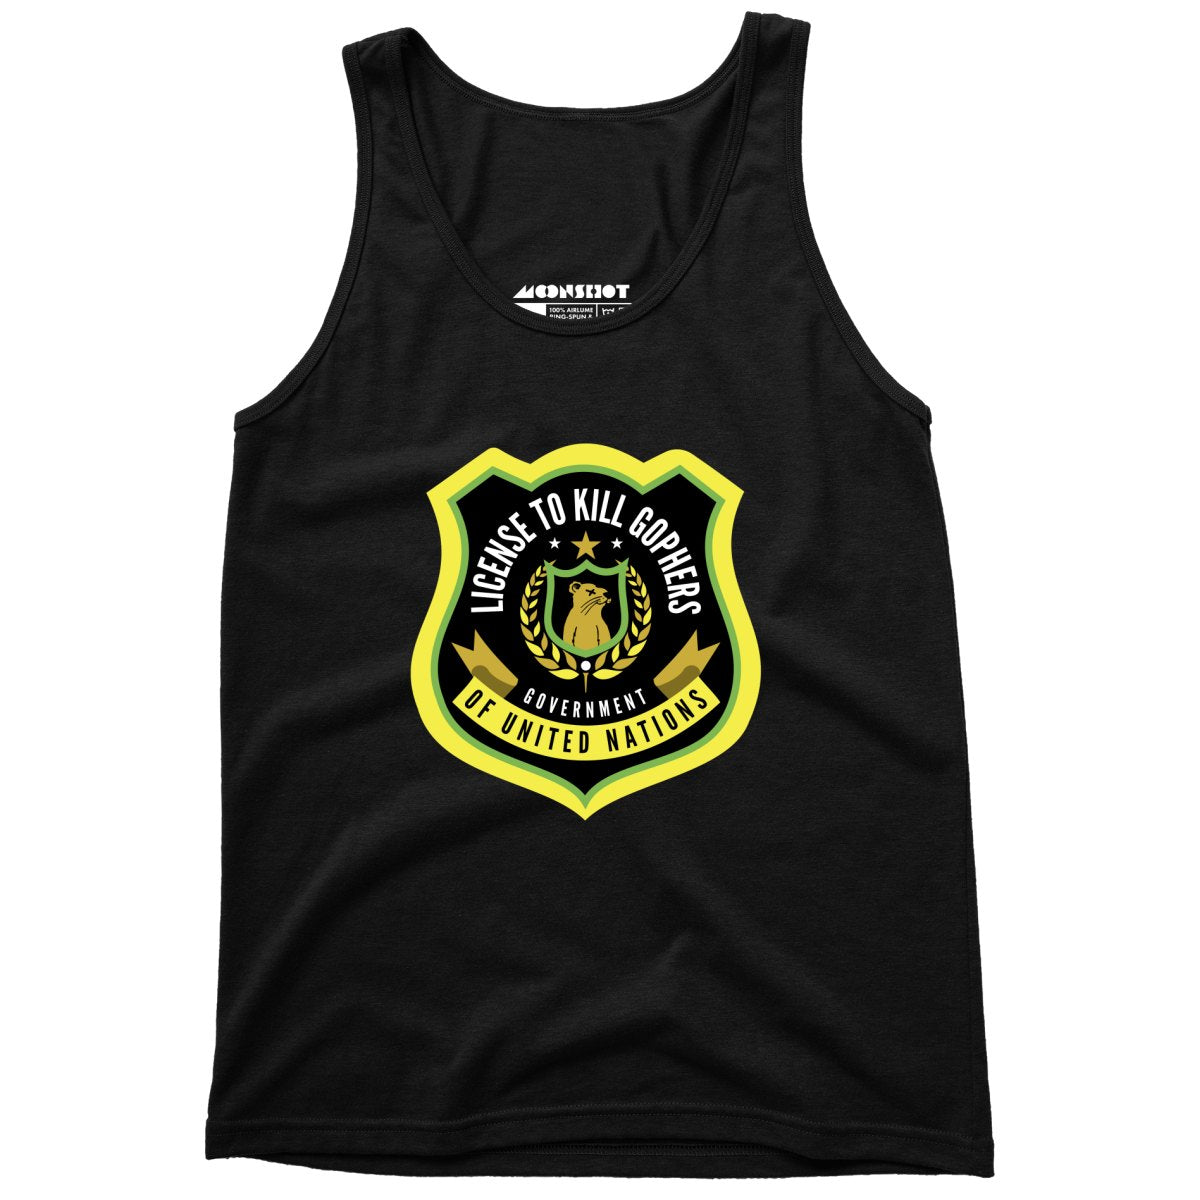 License to Kill Gophers - Unisex Tank Top